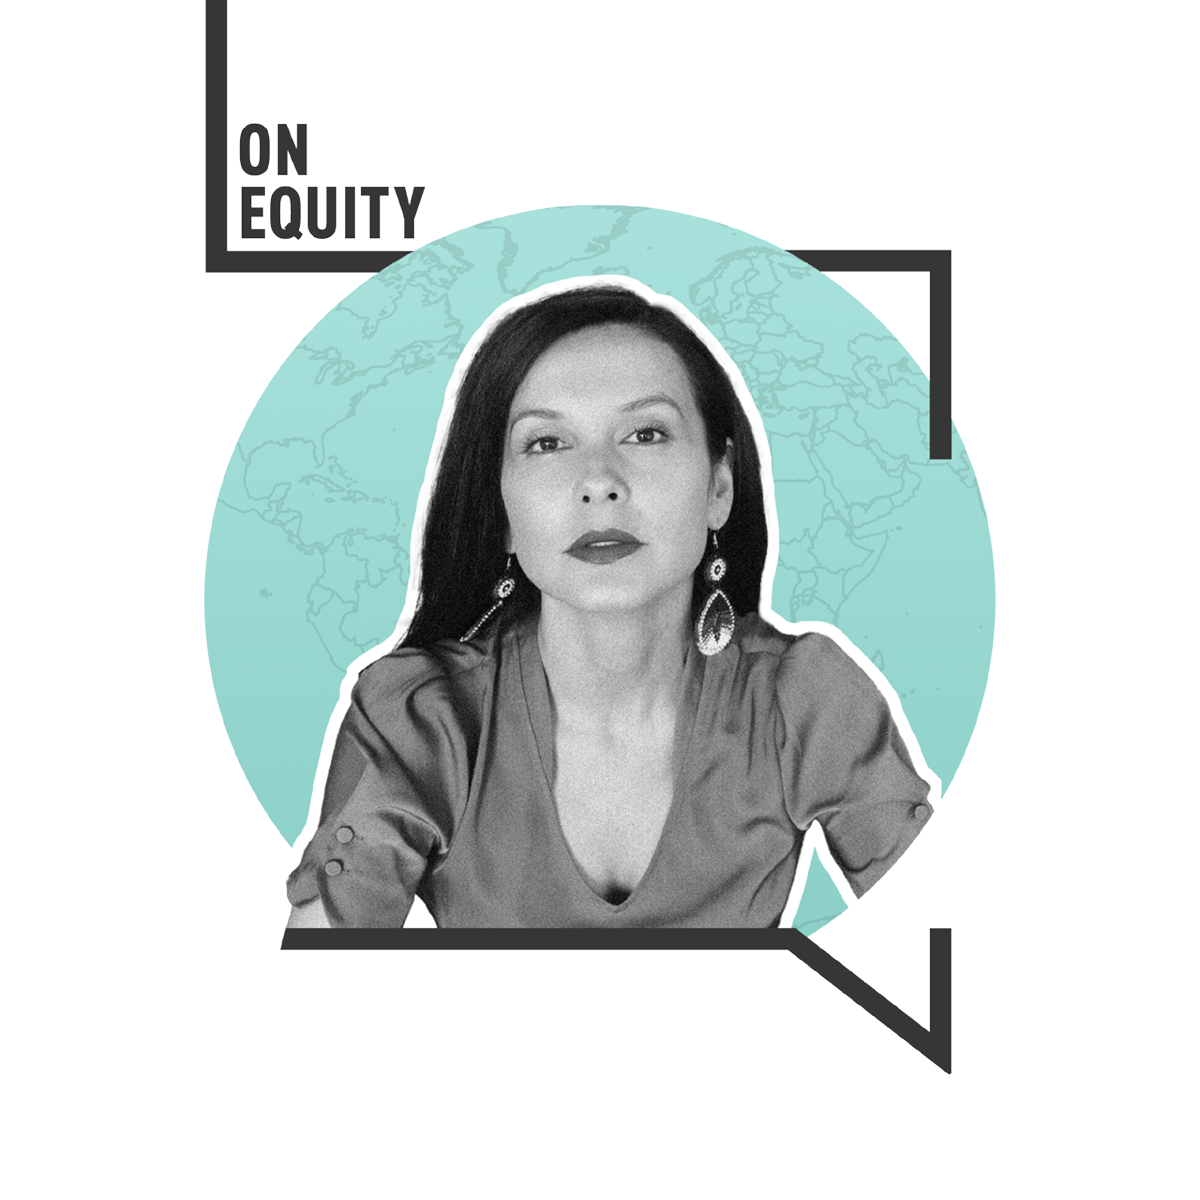 A black and white headshot of Melina Laboucan-Massimo on a teal circle inside the black outline of a speech bubble with the text "On Equity" in the top left corner.